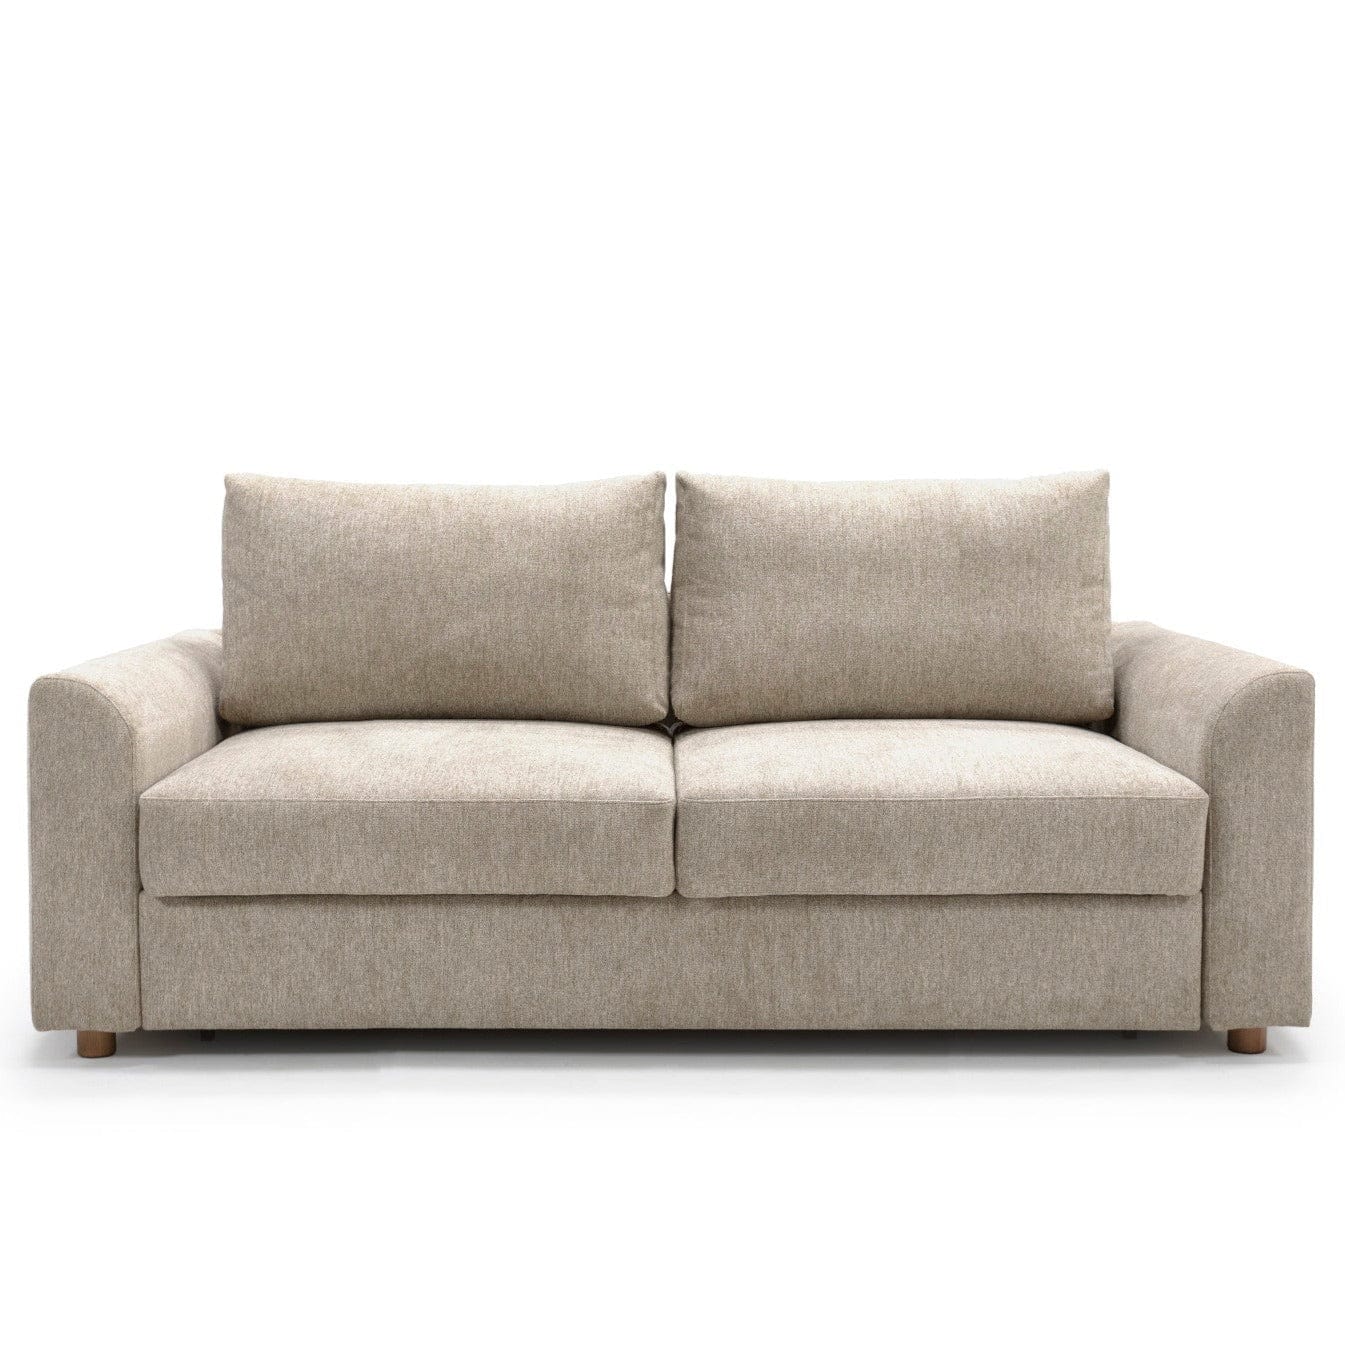 Innovation Living Neah Sofa Bed with Curved Arms